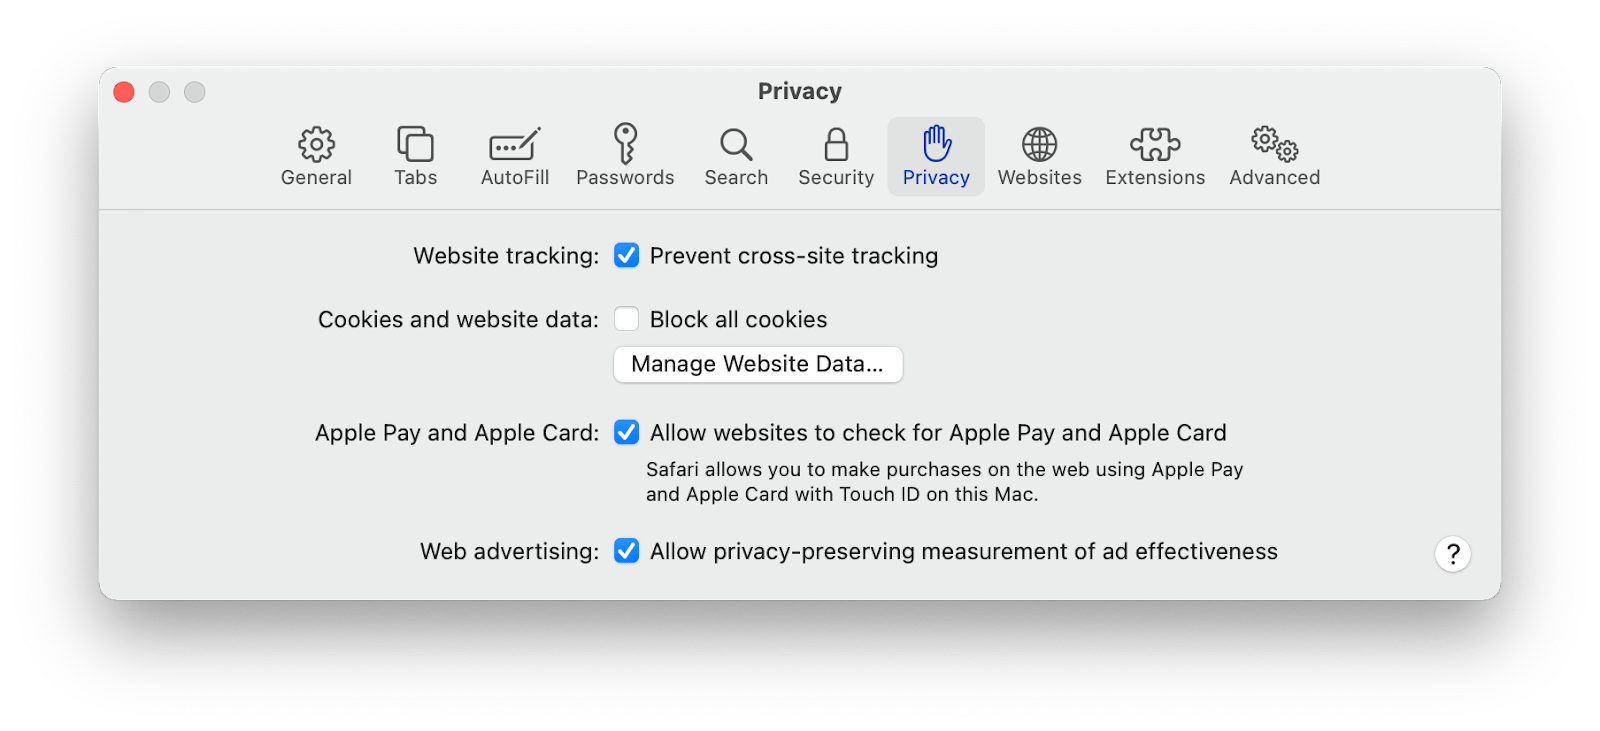 edge clearing cookies and cache on safari